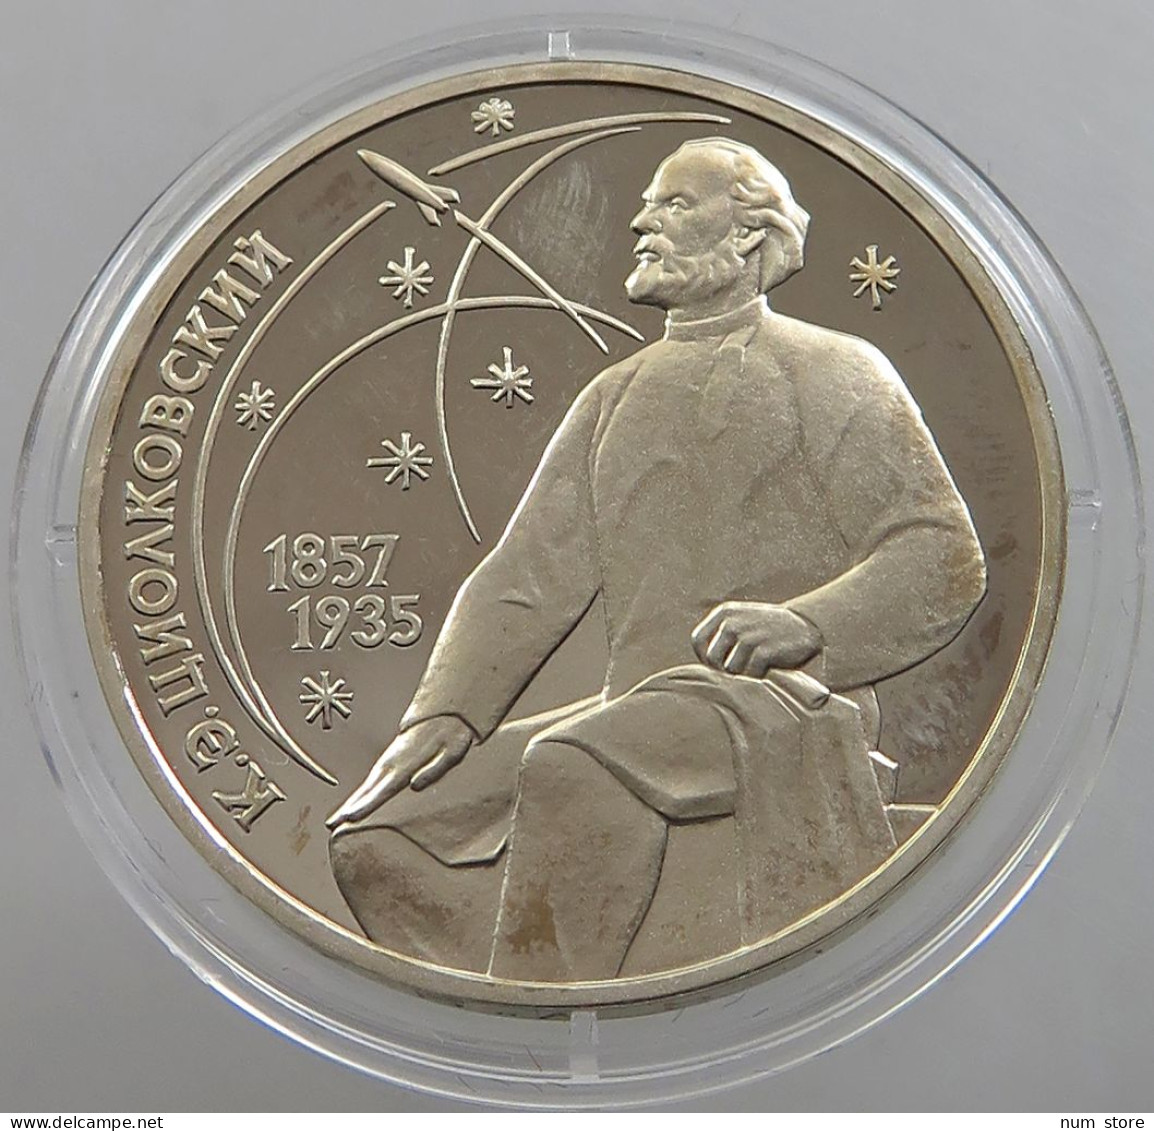 RUSSIA USSR 1 ROUBLE 1987 Tsiolkovsky PROOF #sm14 0643 - Russia